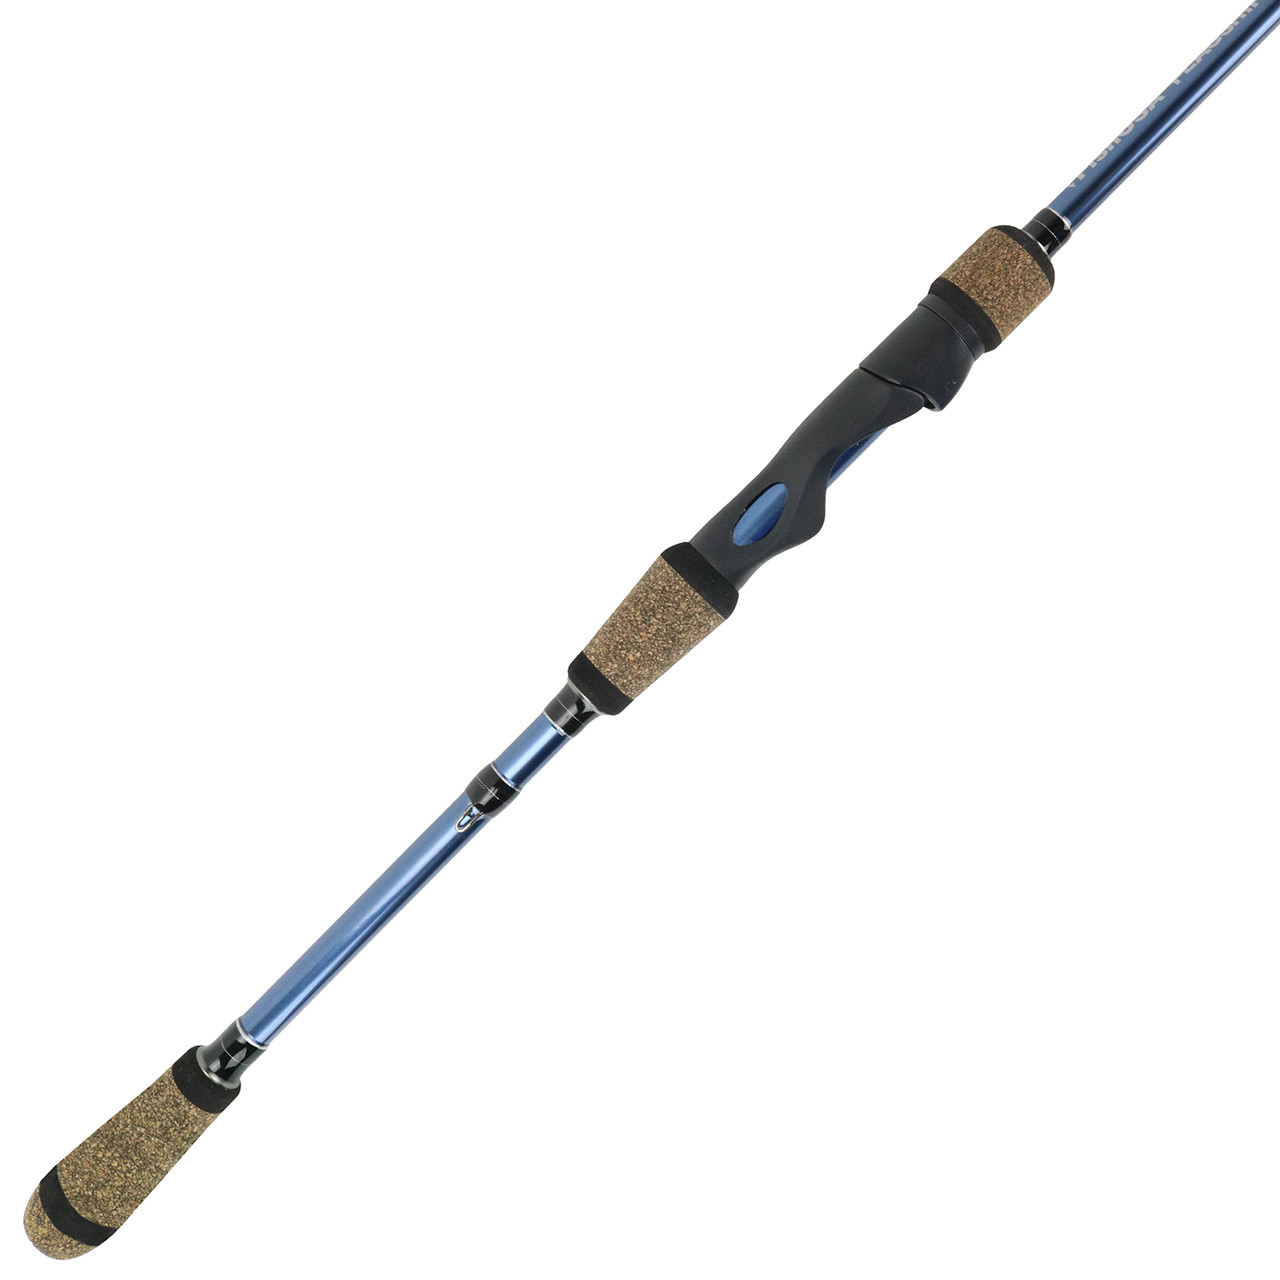 Telescopic Fishing Rod Fish Rod with Reel Fishing Pole for Trout Bass 